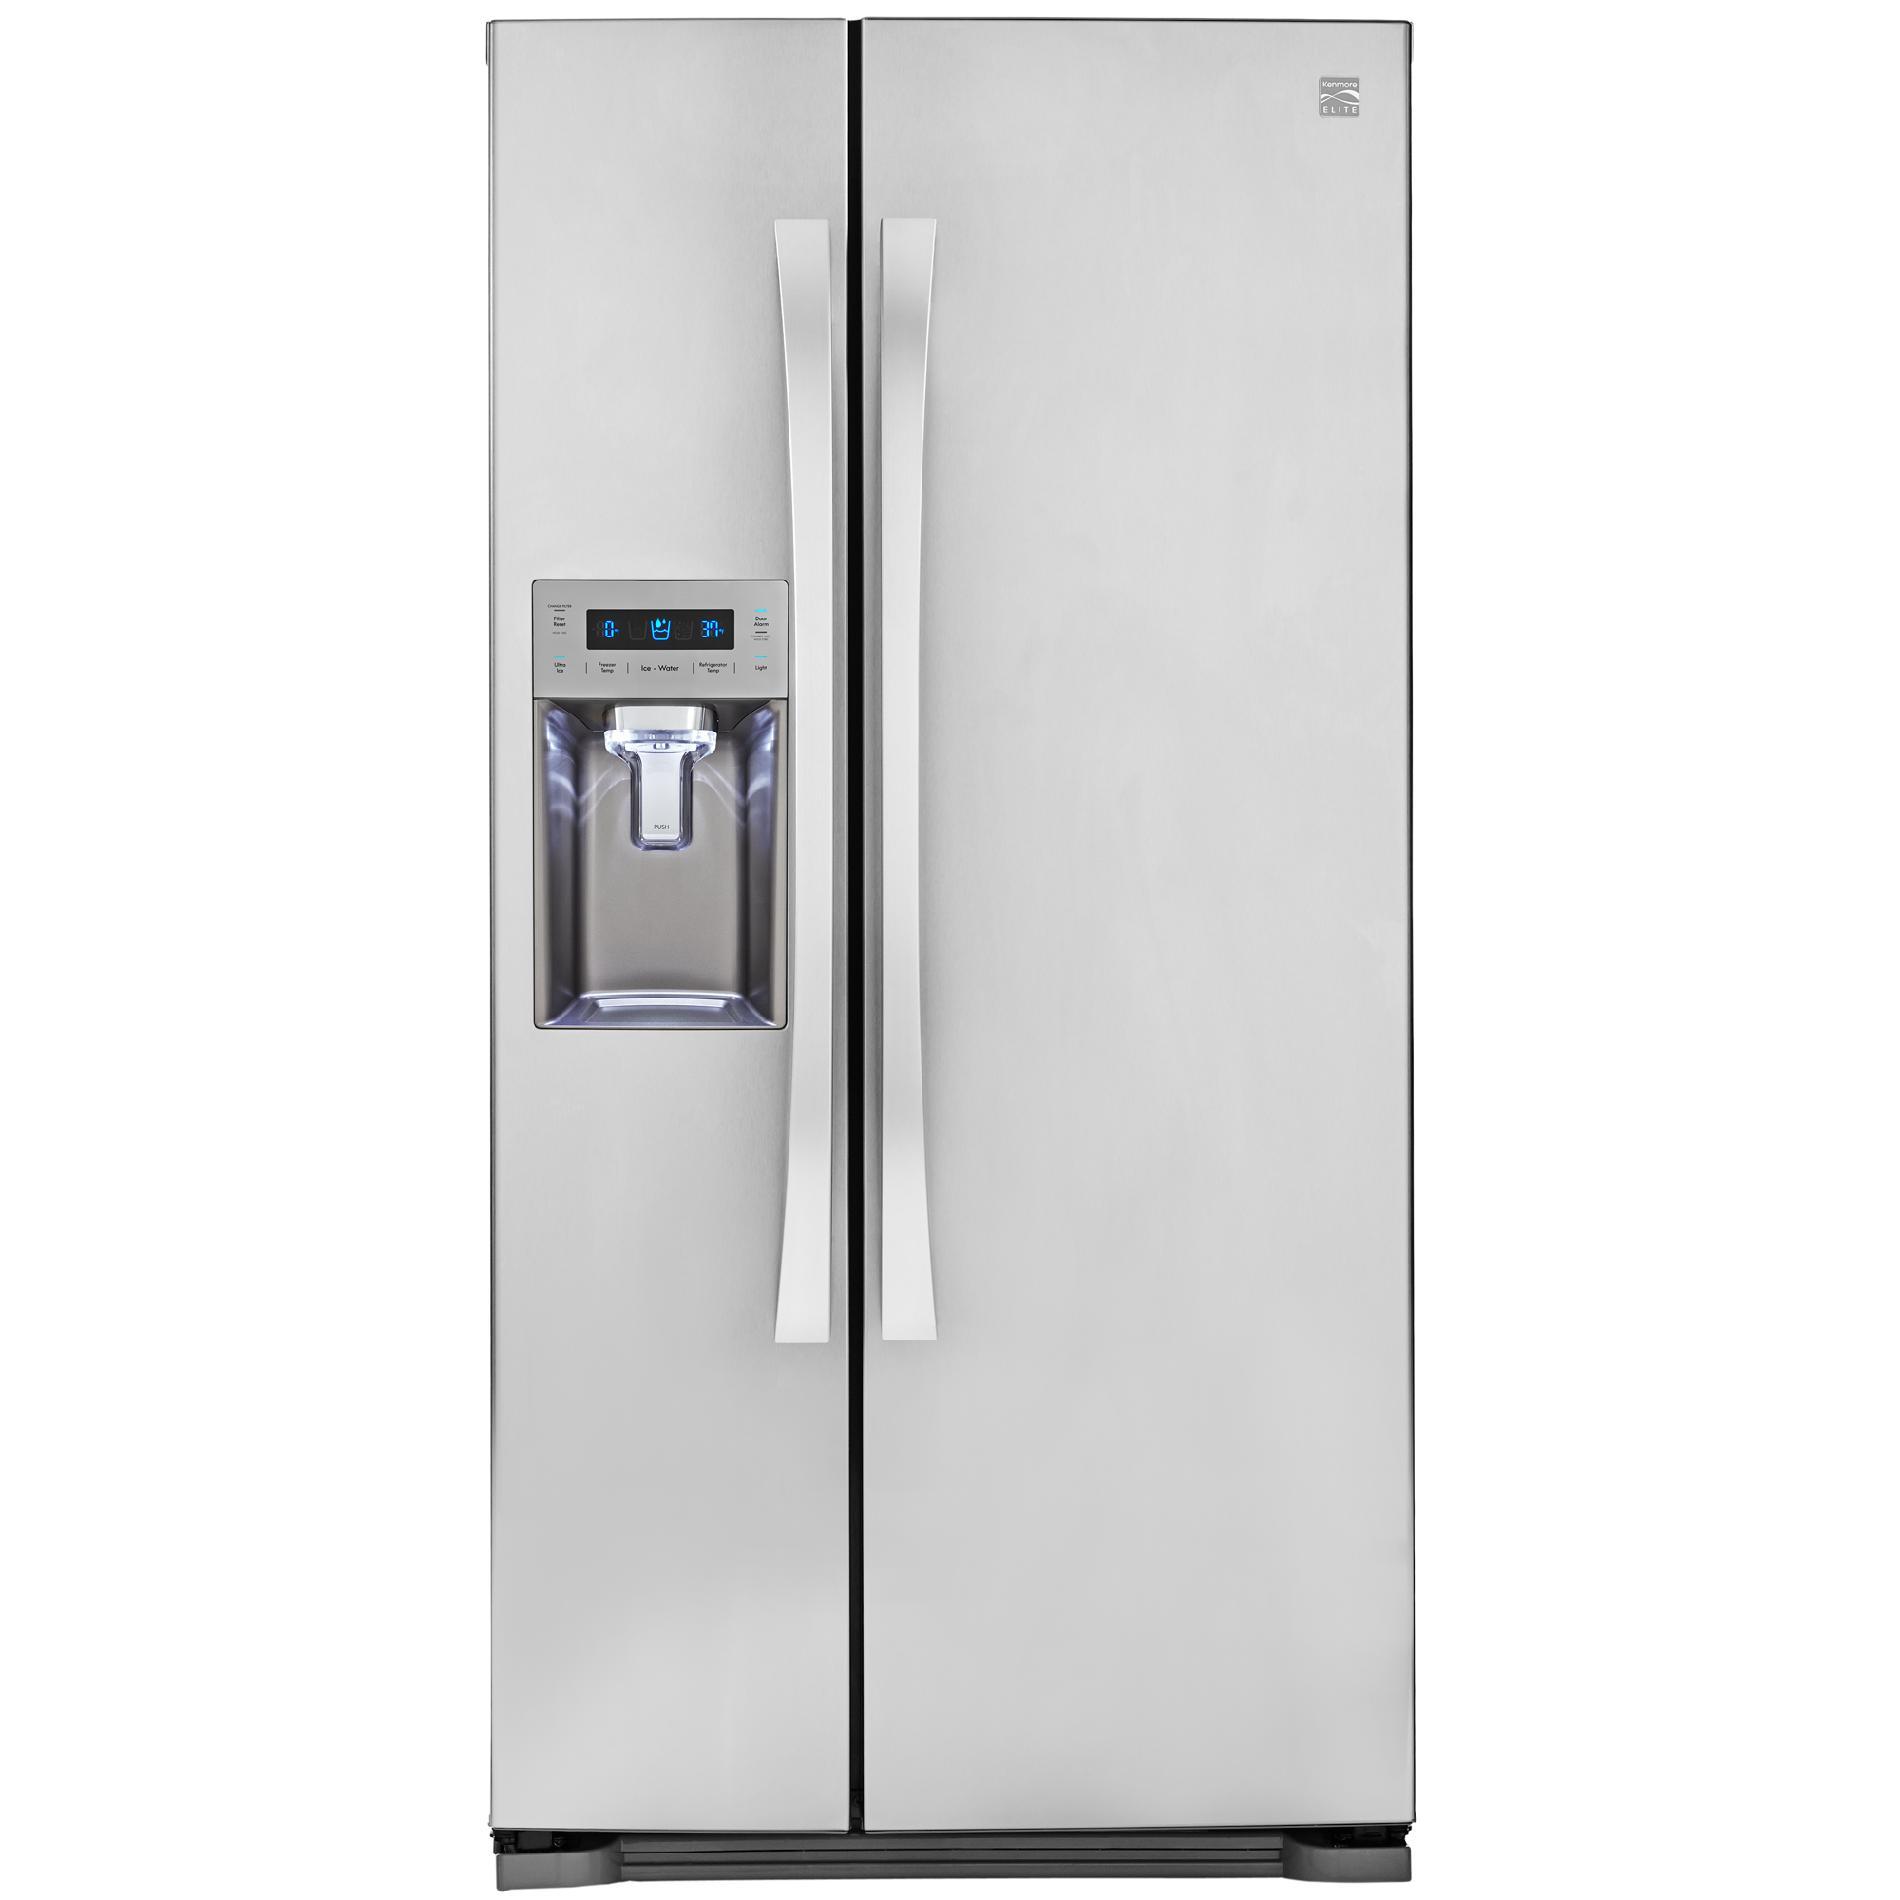 Kenmore Elite 51823 21.9 Cu. Ft. Side-by-Side Refrigerator with Dispenser - Stainless Steel (Silver)